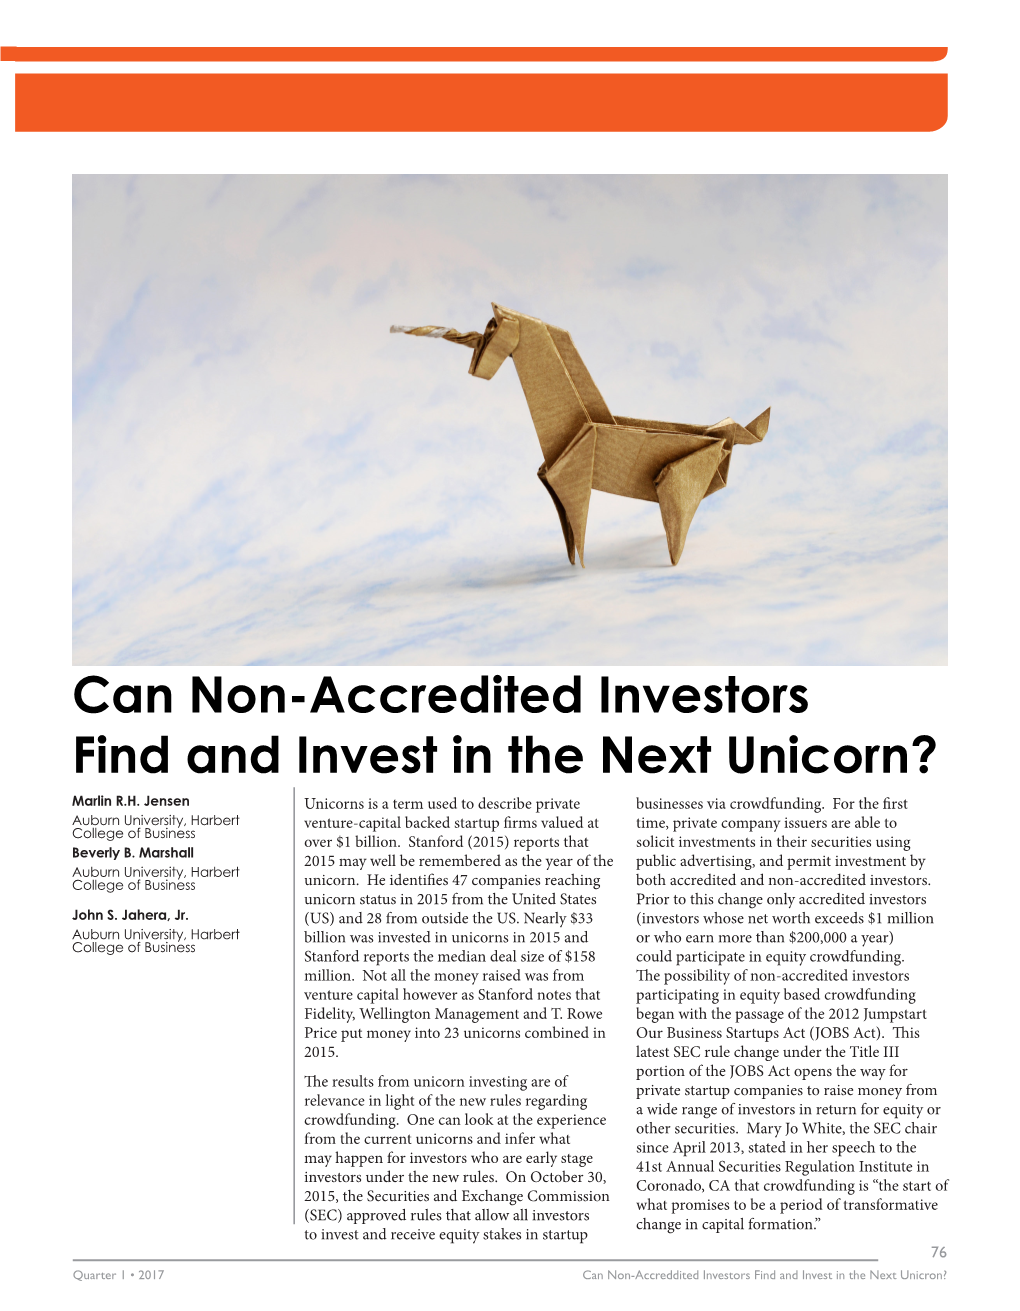 Can Non-Accredited Investors Find and Invest in the Next Unicorn? Marlin R.H